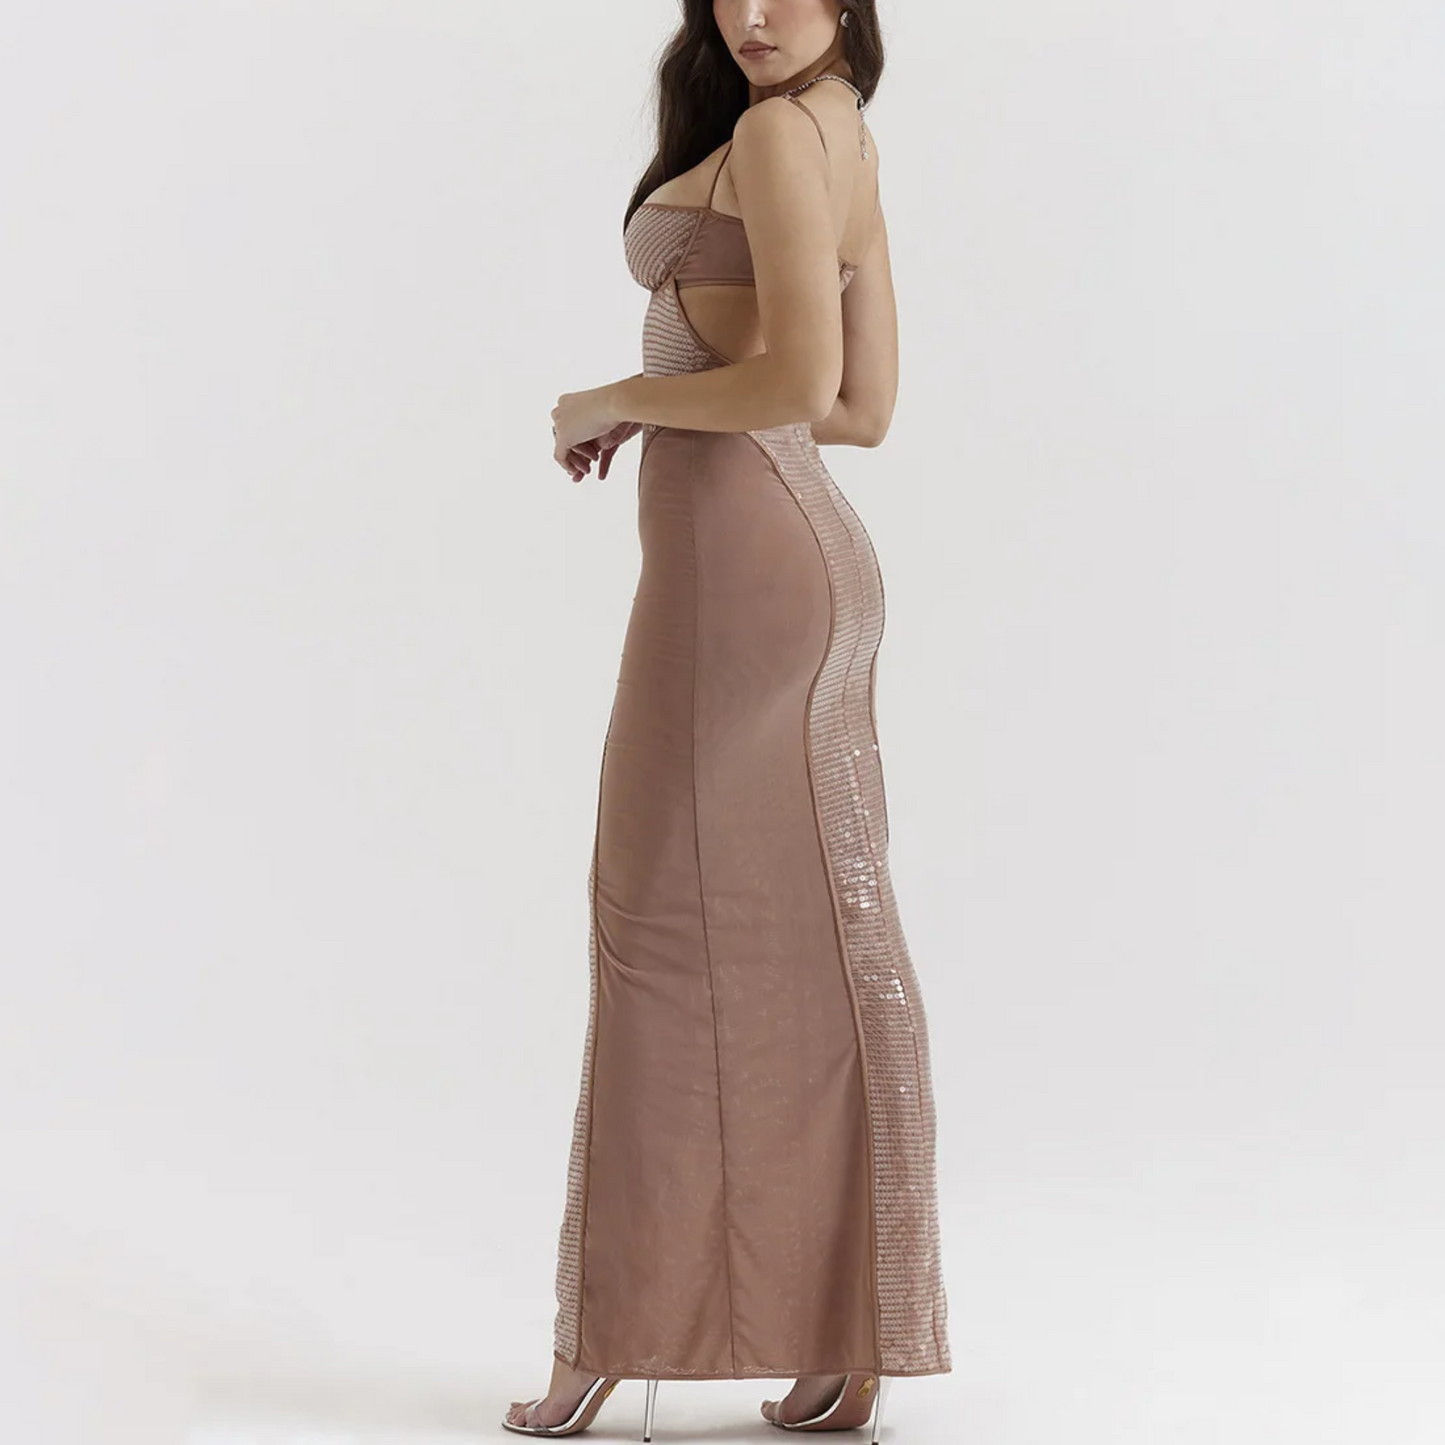 Maria - Beige Sequin Embellished Maxi Bodycon Dress